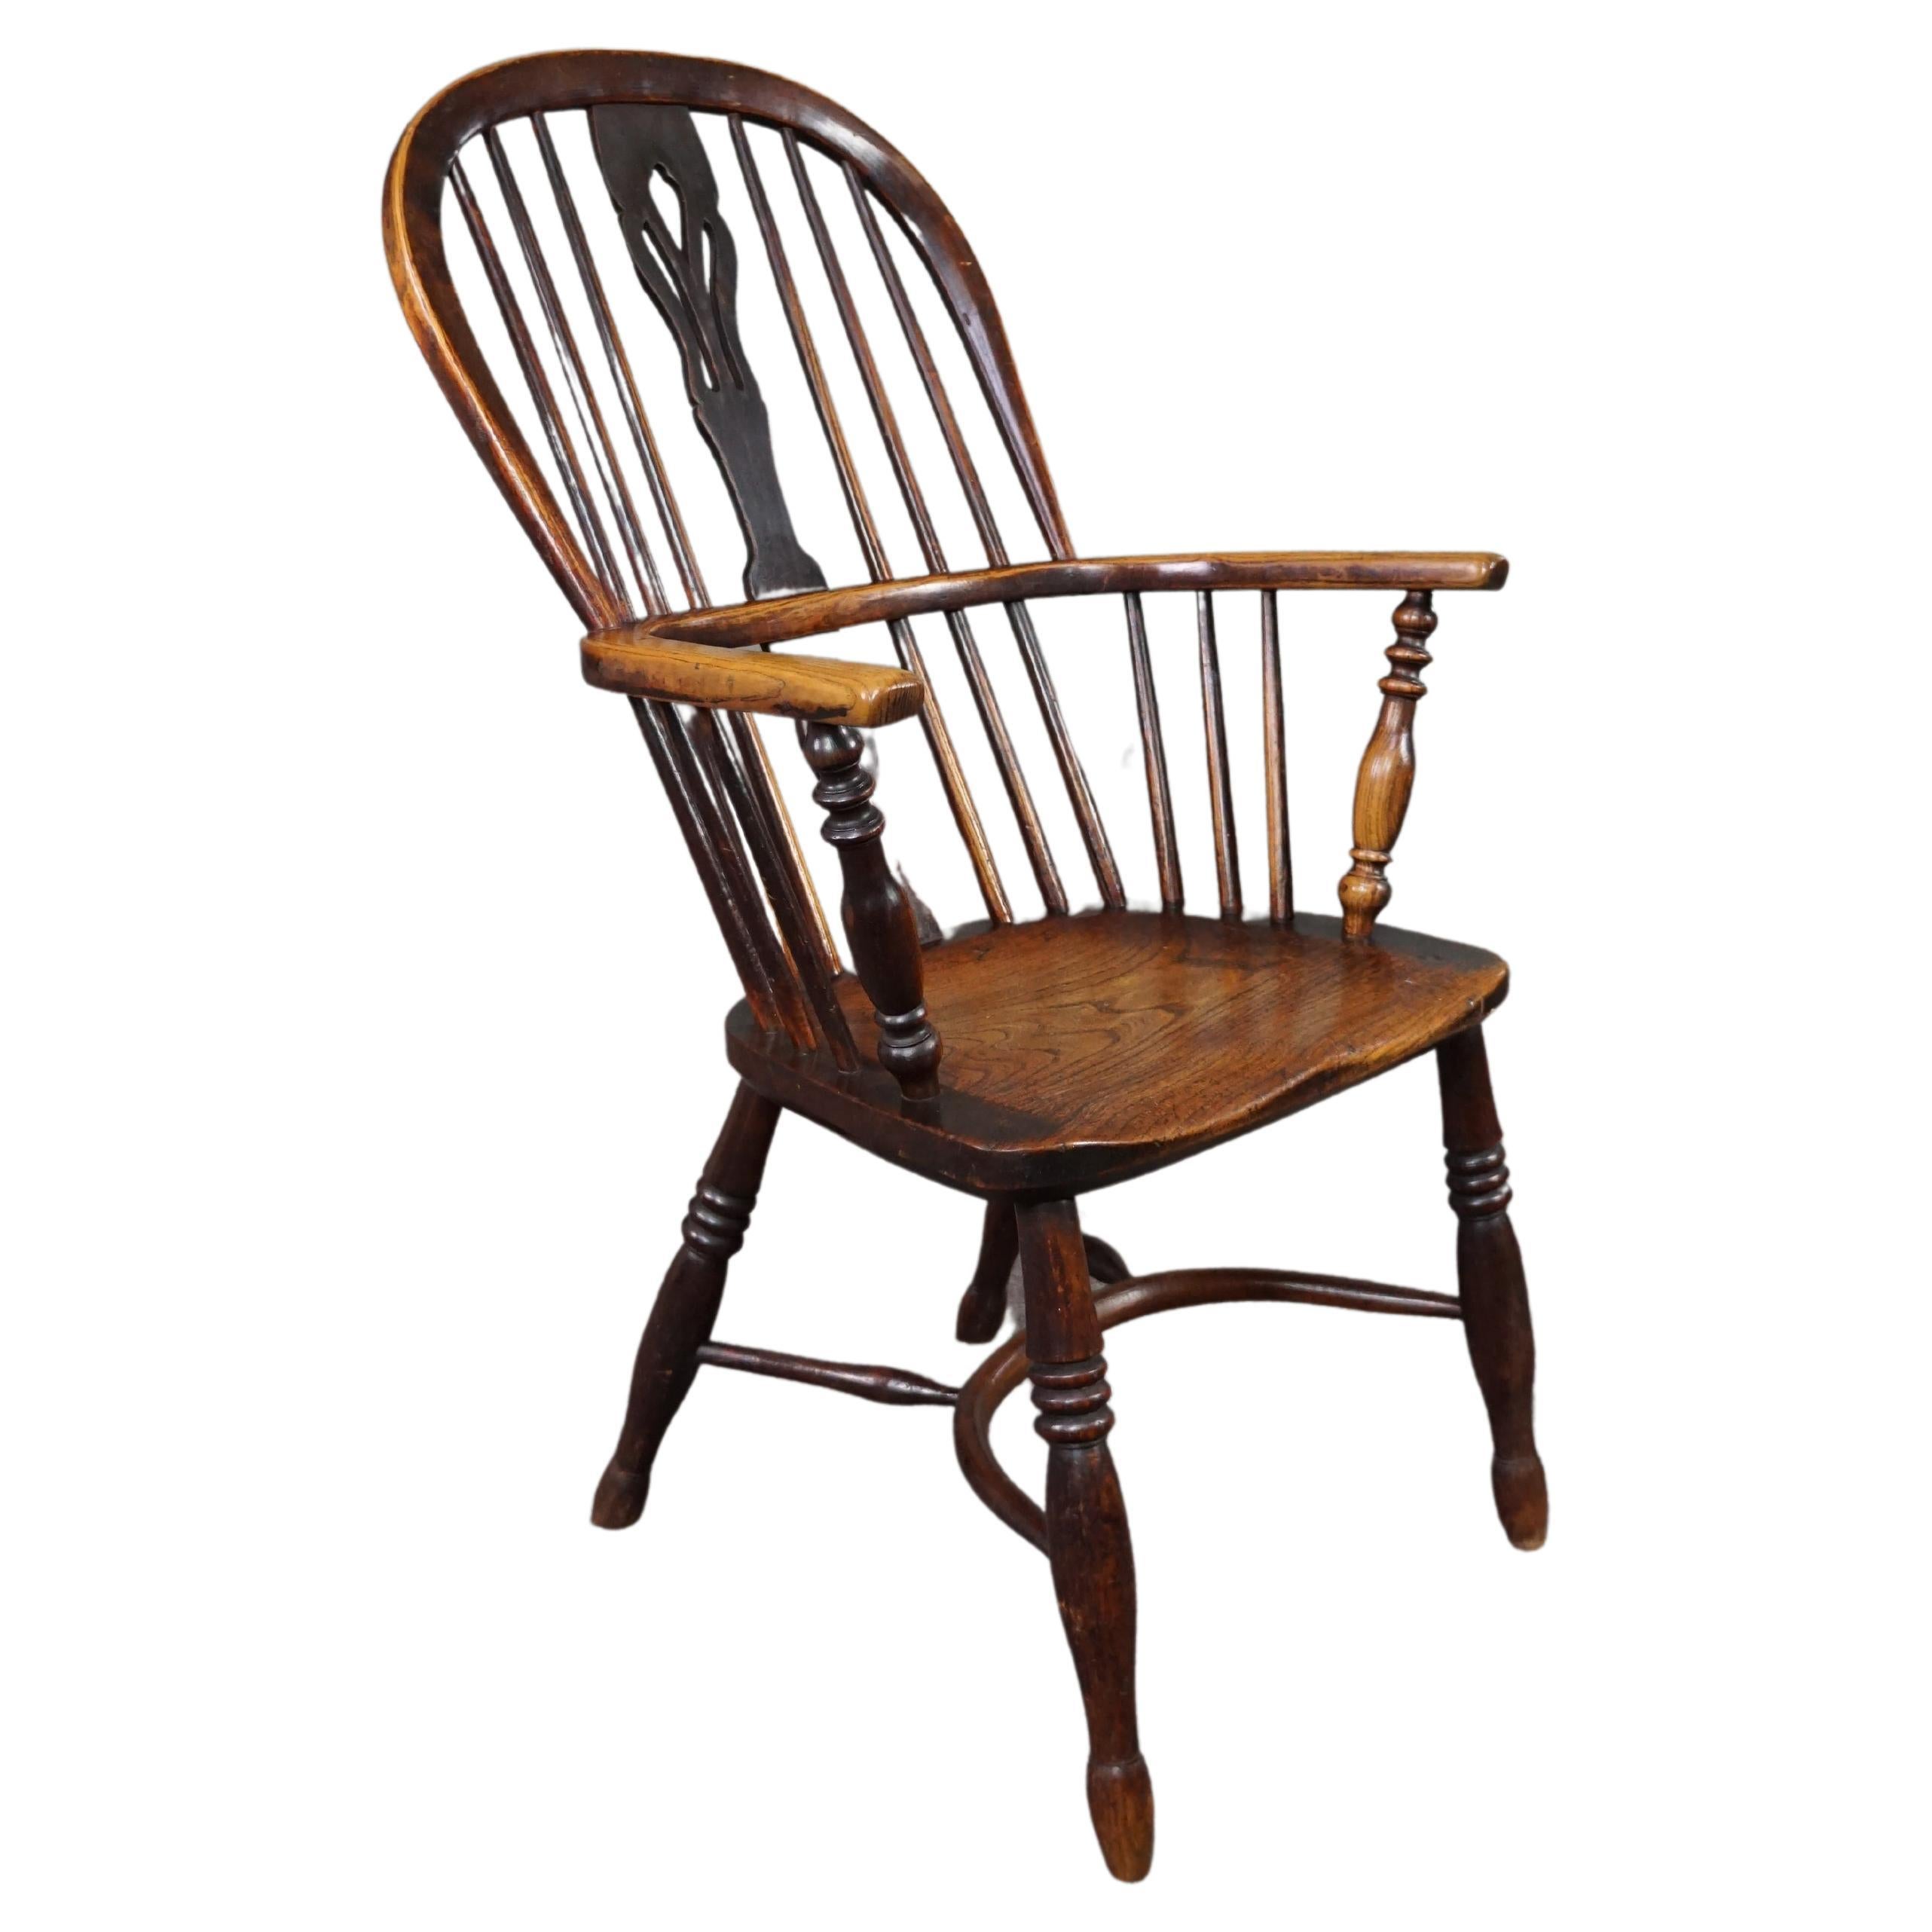 English antique Windsor armchair/chair, High Back, 18th century